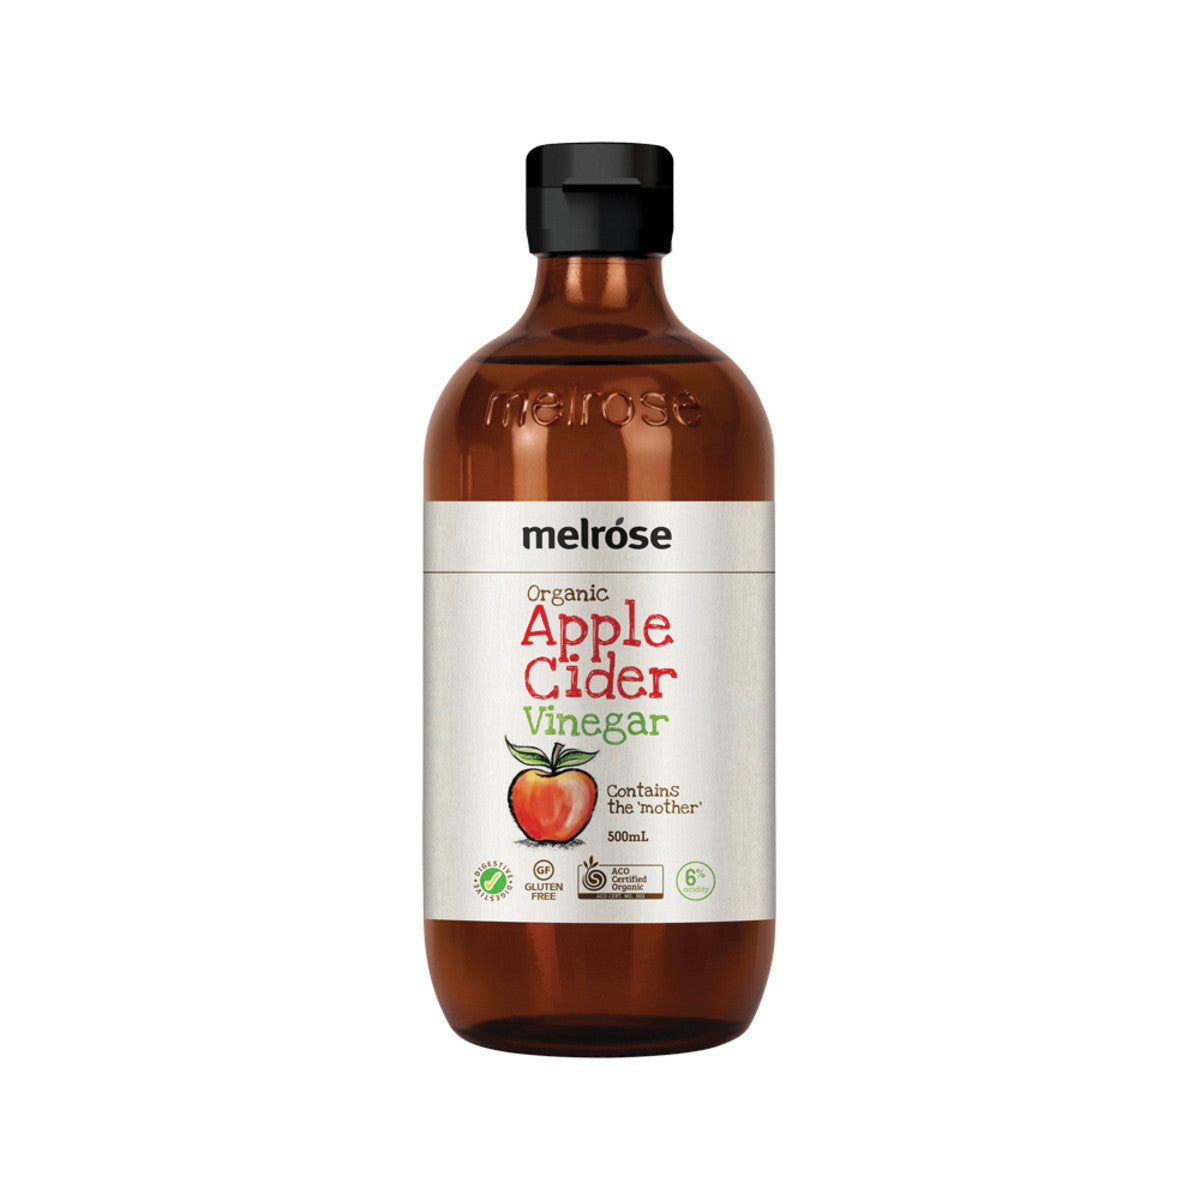 Melrose - Organic Apple Cider Vinegar (Contains The 'Mother')